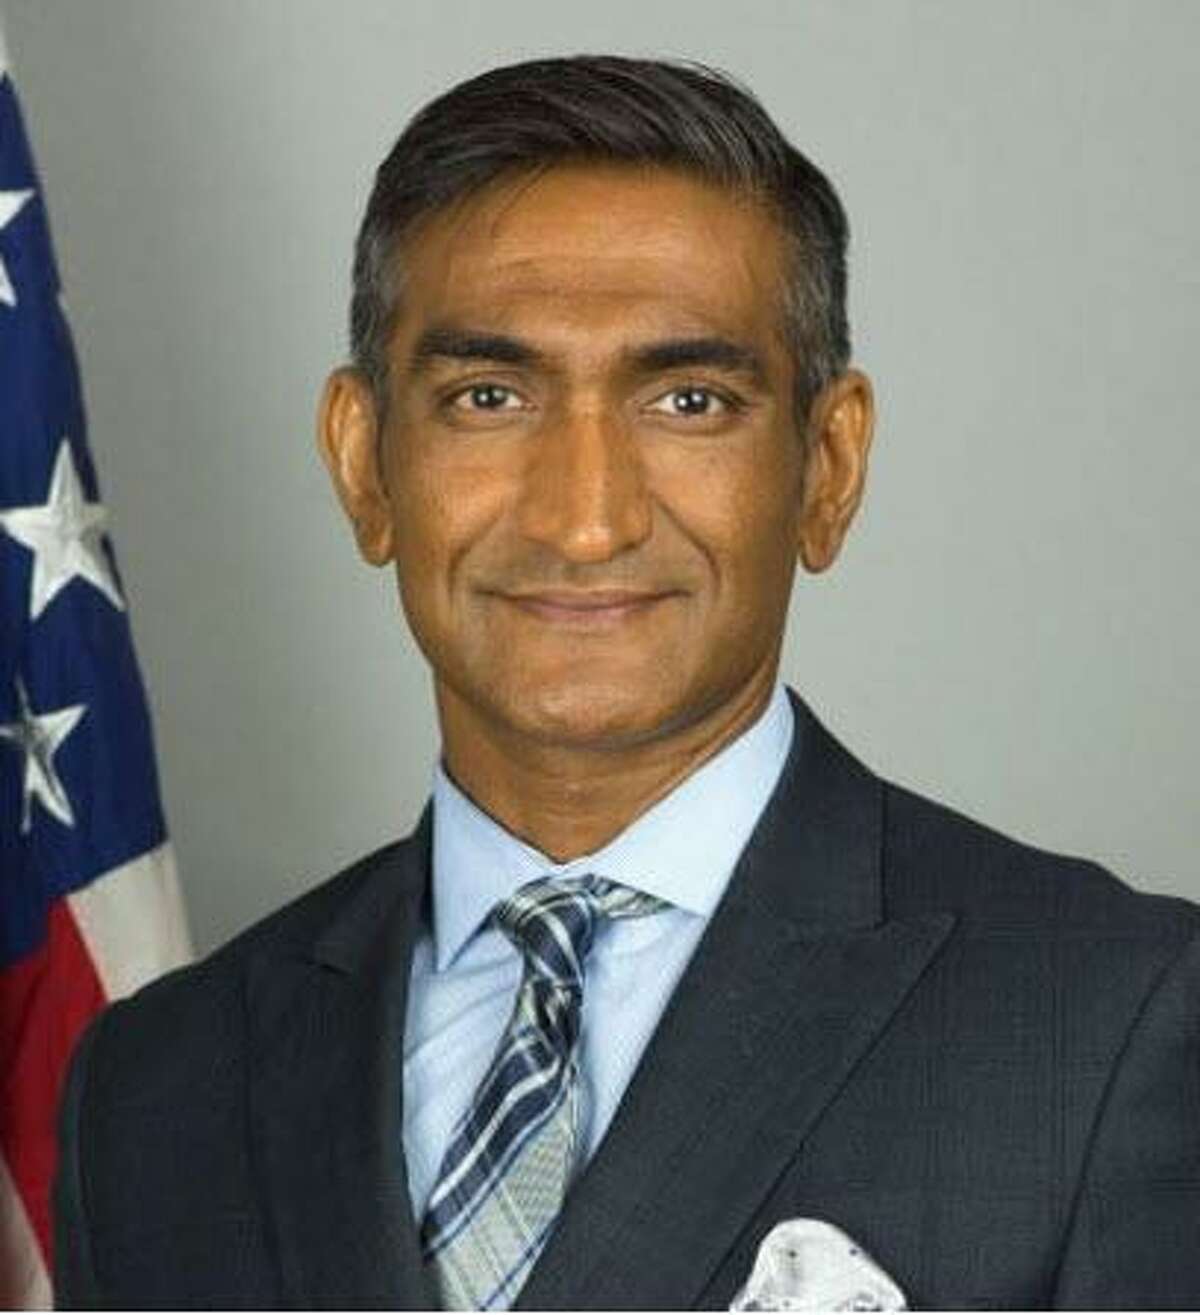 Alamdar S. Hamdani is a finalist for U.S. attorney in the Southern District of Texas, according to a source with firsthand knowledge. The person declined attribution because the interview process is confidential.